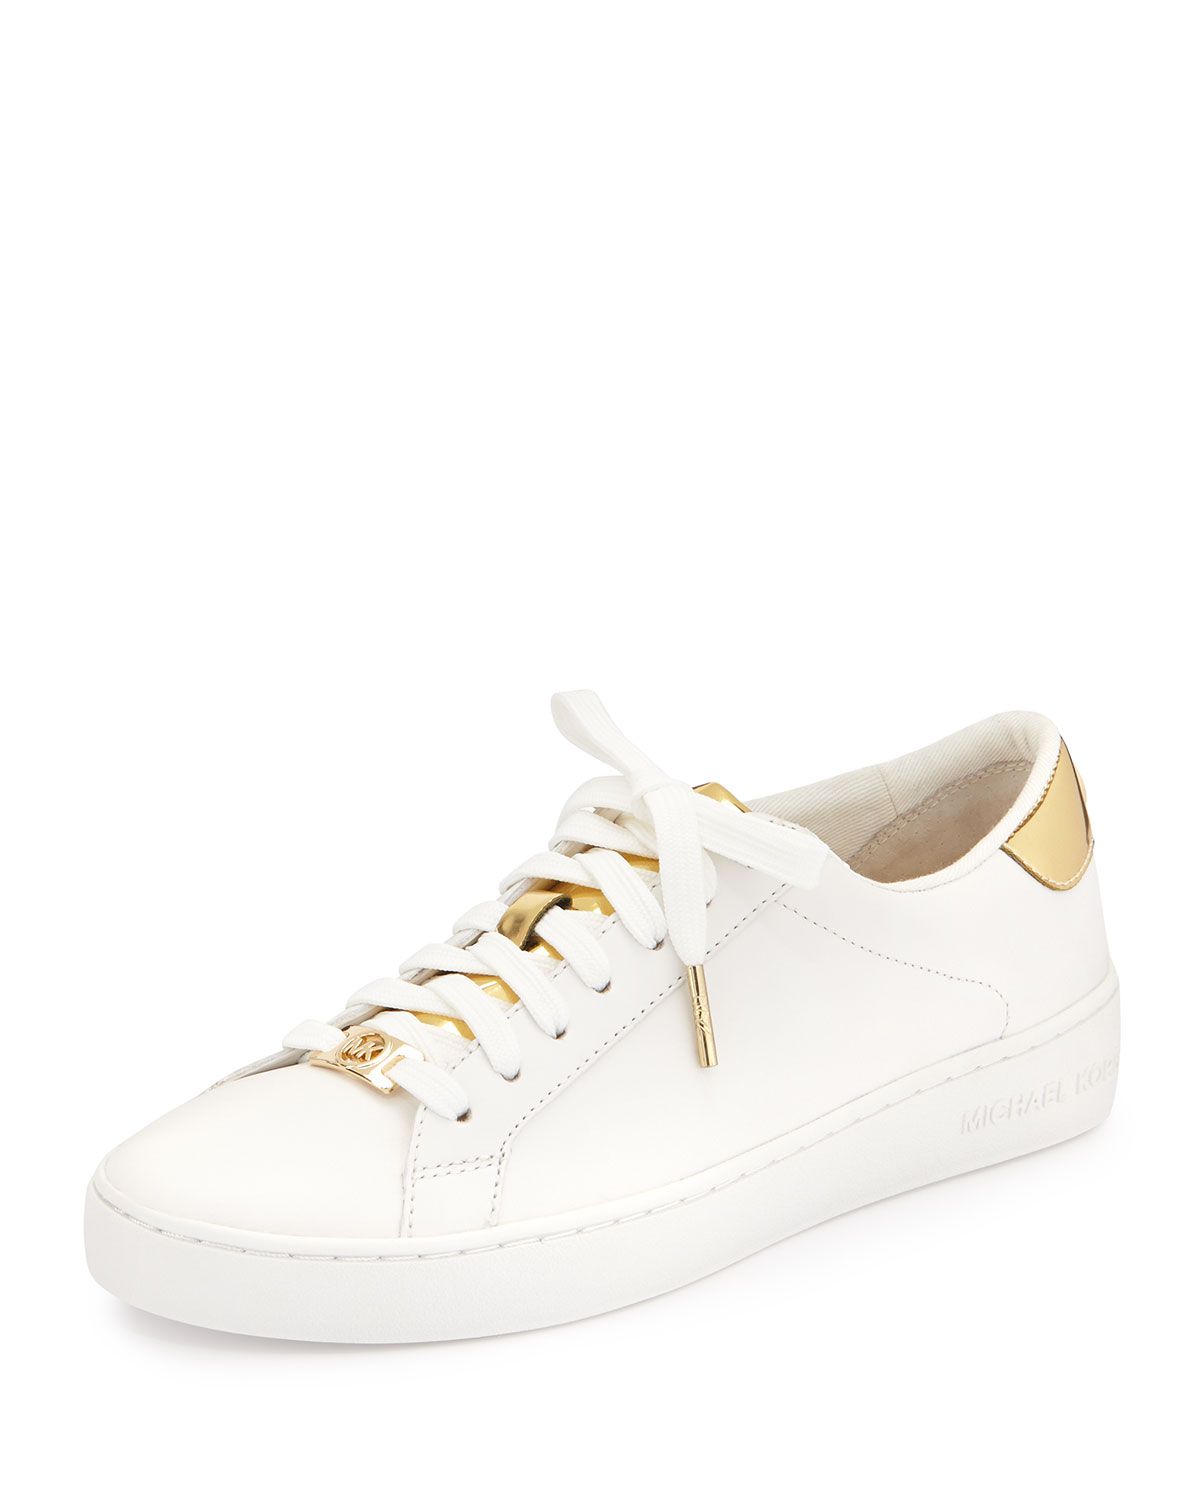 Irving Leather Lace-Up Sneaker, Optic White/Pale Gold, Size: 39.0B/9.0B - MICHAEL Michael Kors | Neiman Marcus